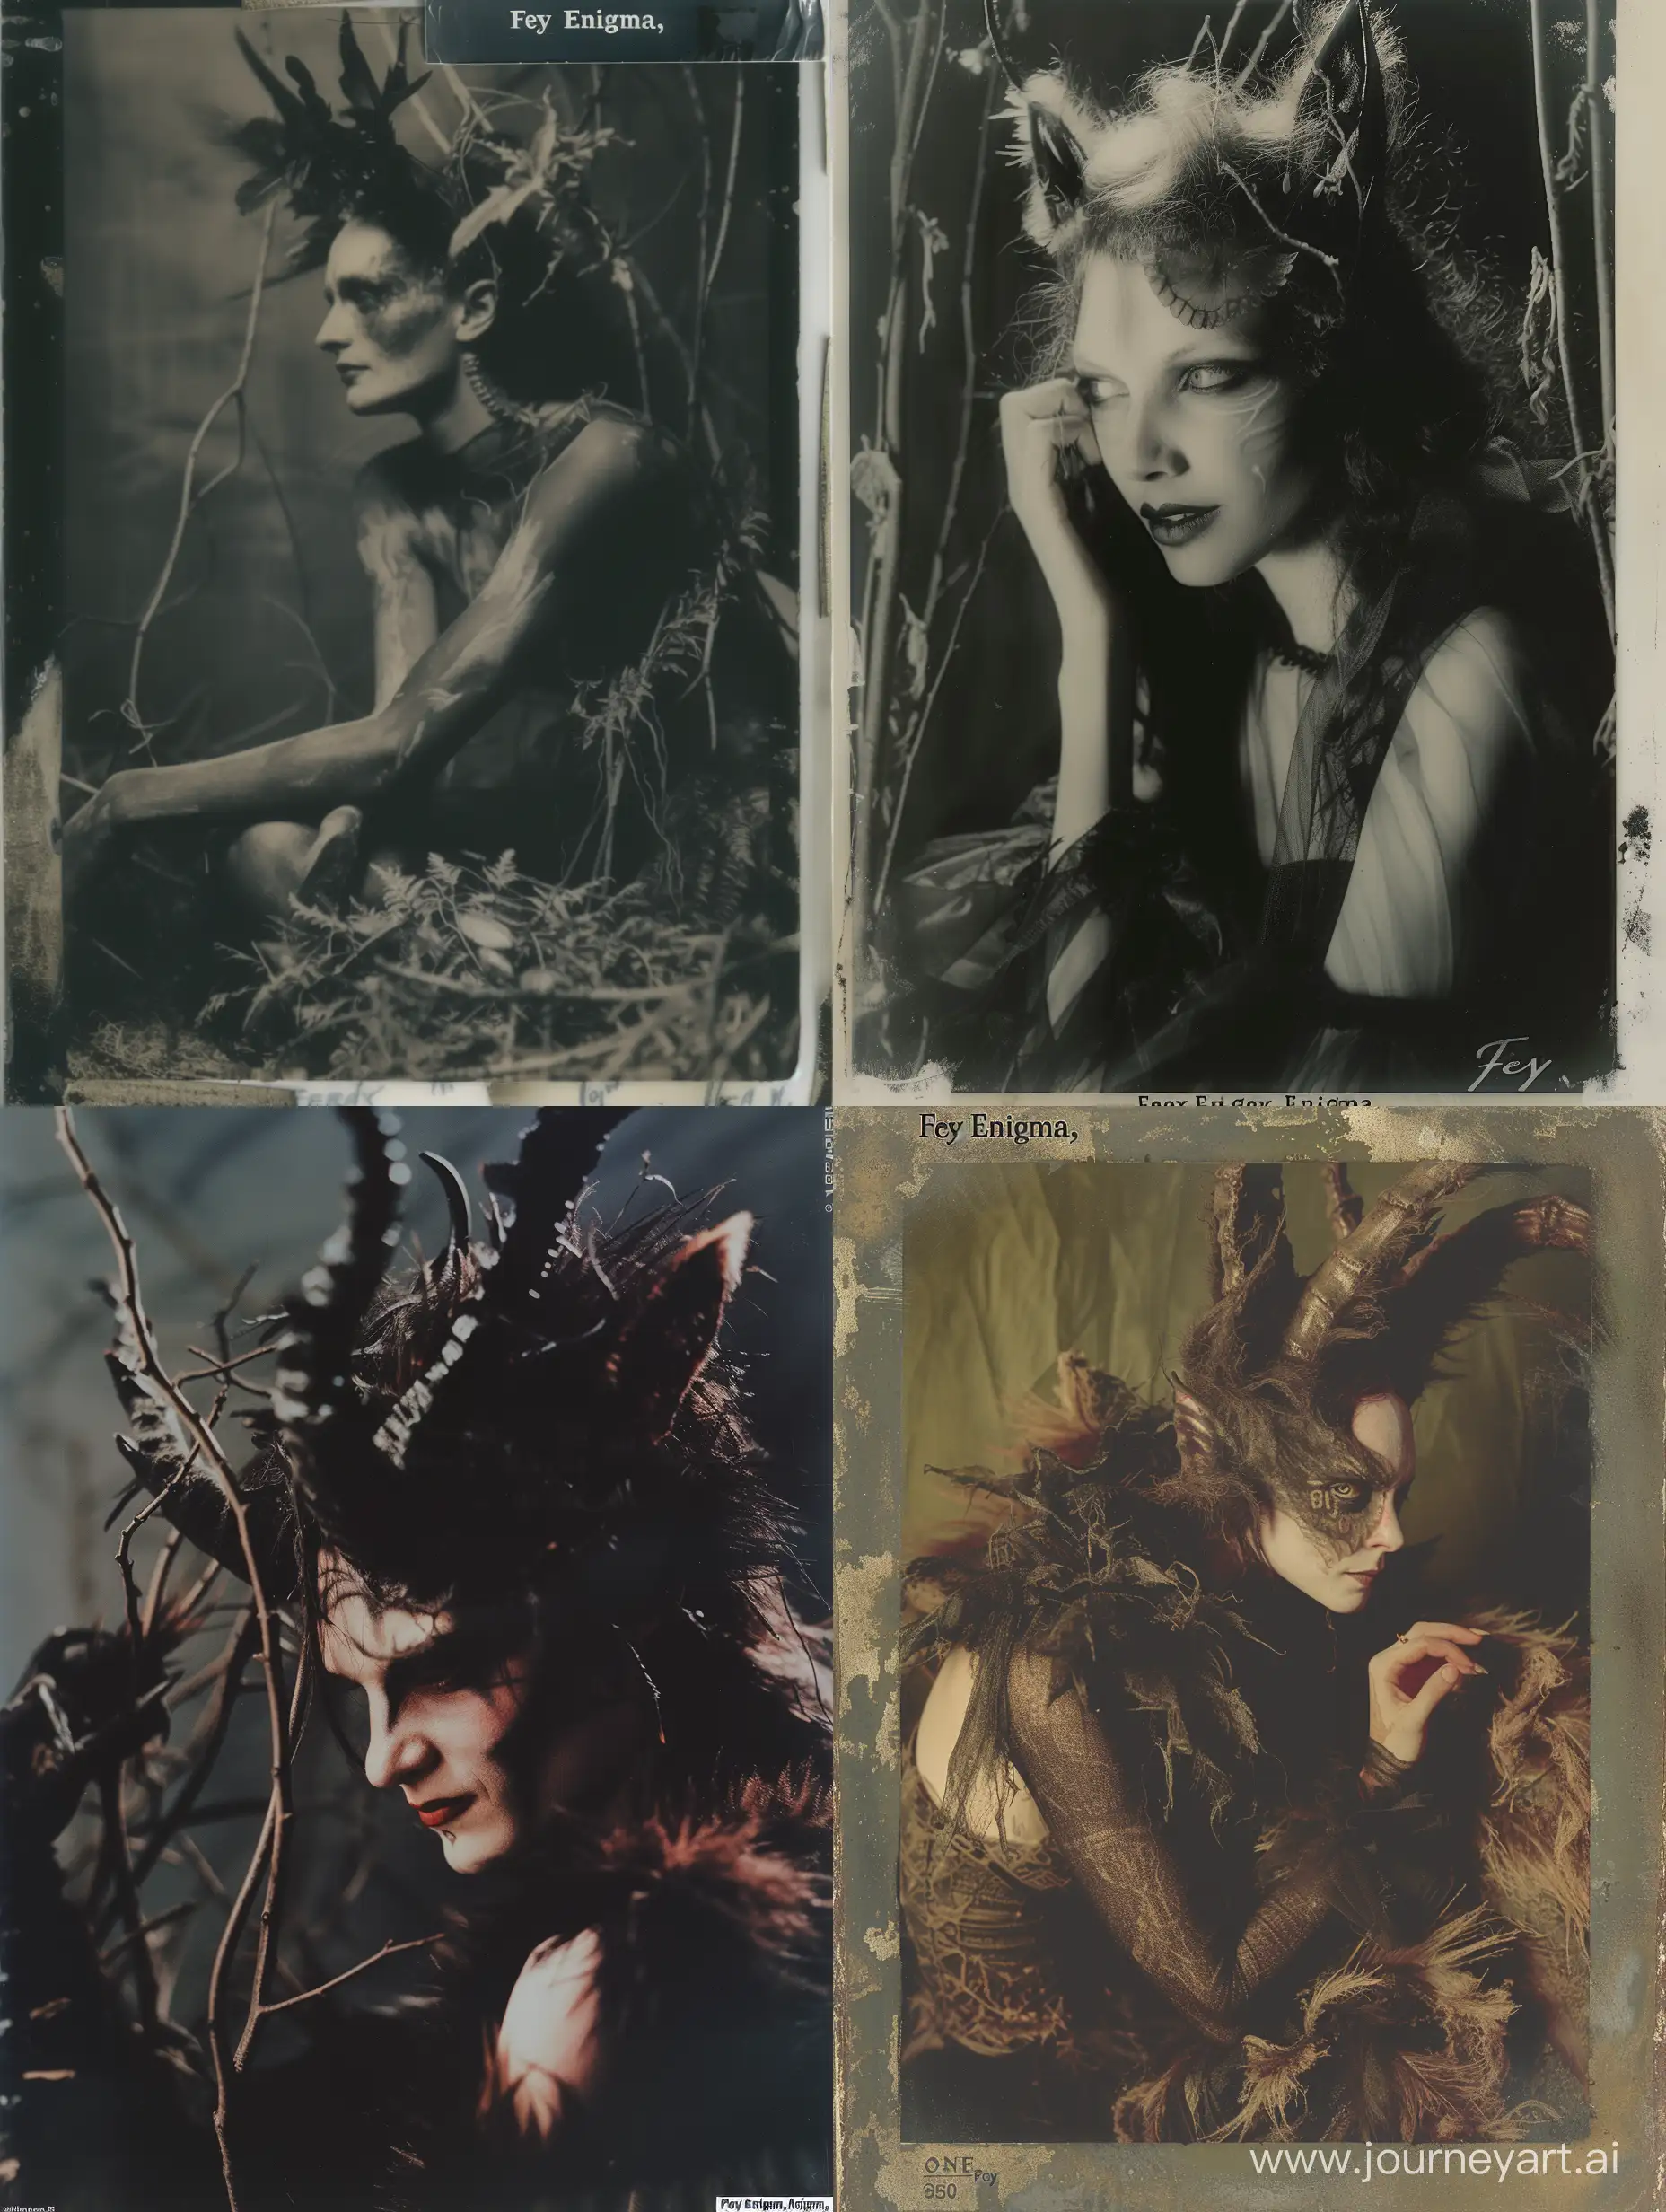 a hauntingly beautiful creature, half-human and half-beast, “Fey Enigma,” Beastly Intrigue," "Caged Mysterium”,  Kenneth anger, Nona limmen, William Mortensen, horror core, dark aesthetic, expired 35mm film